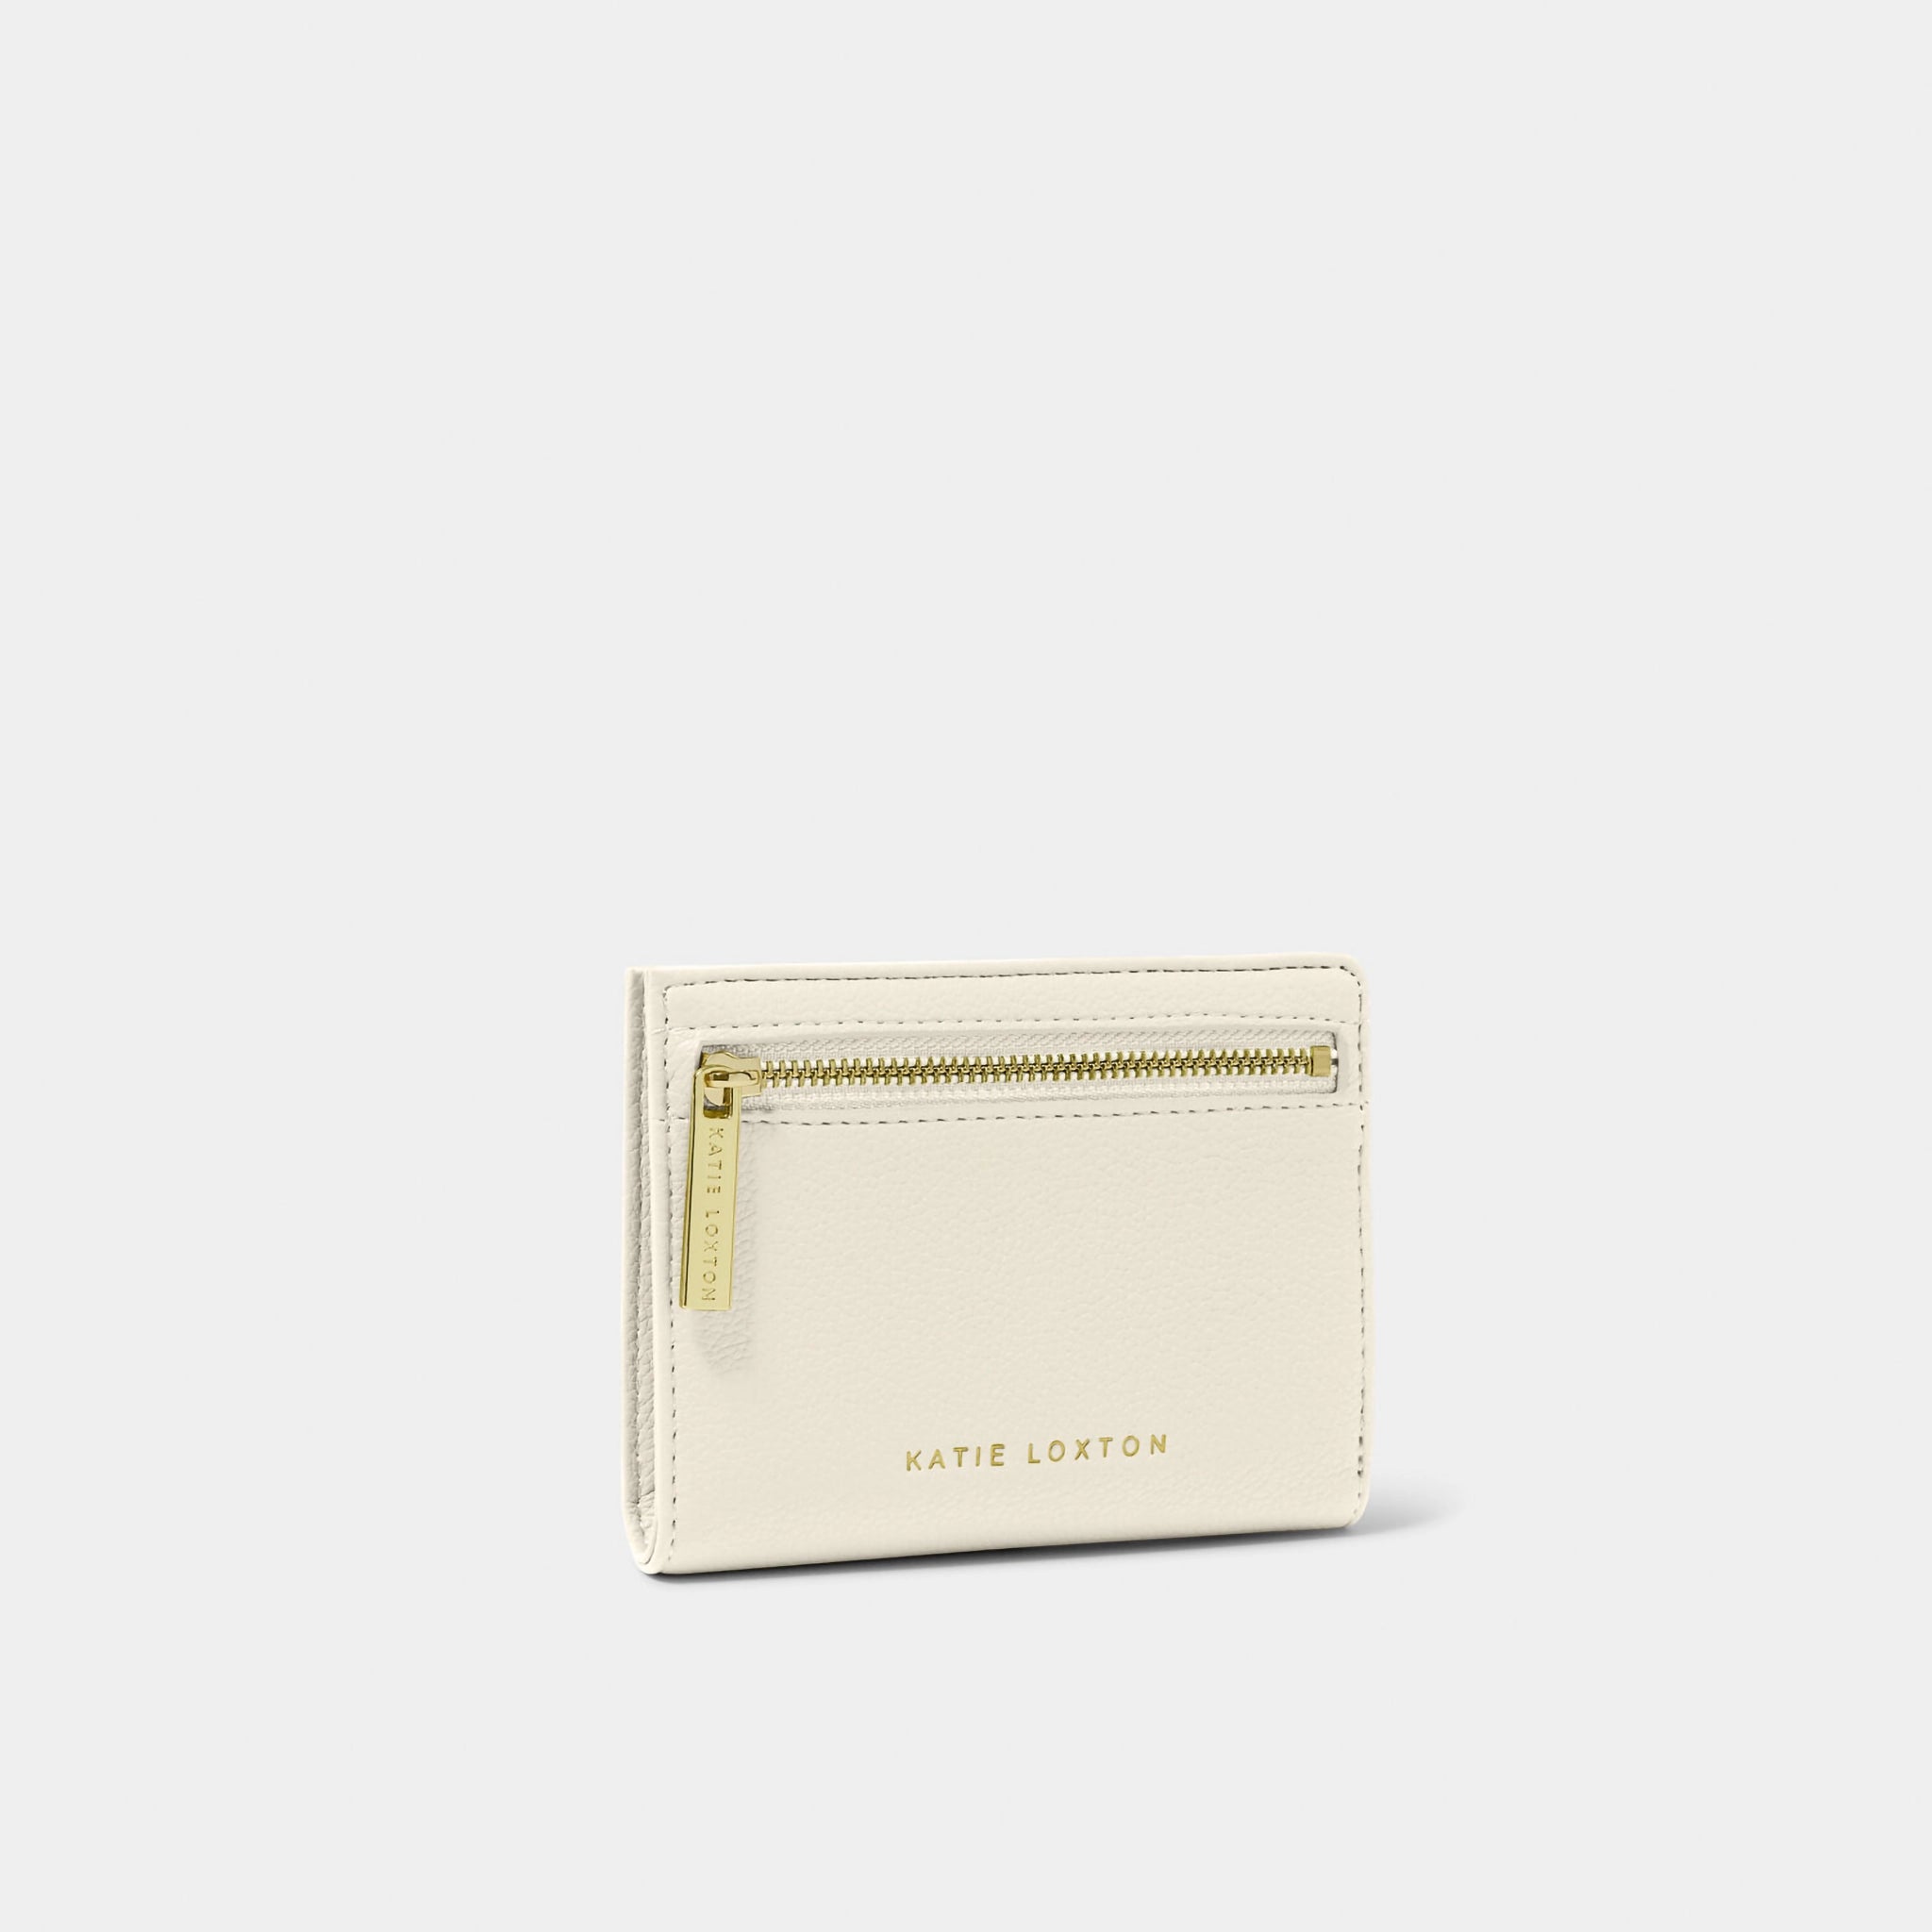 A little ecru purse branded with 'Katie Loxton' and featuring a gold zip